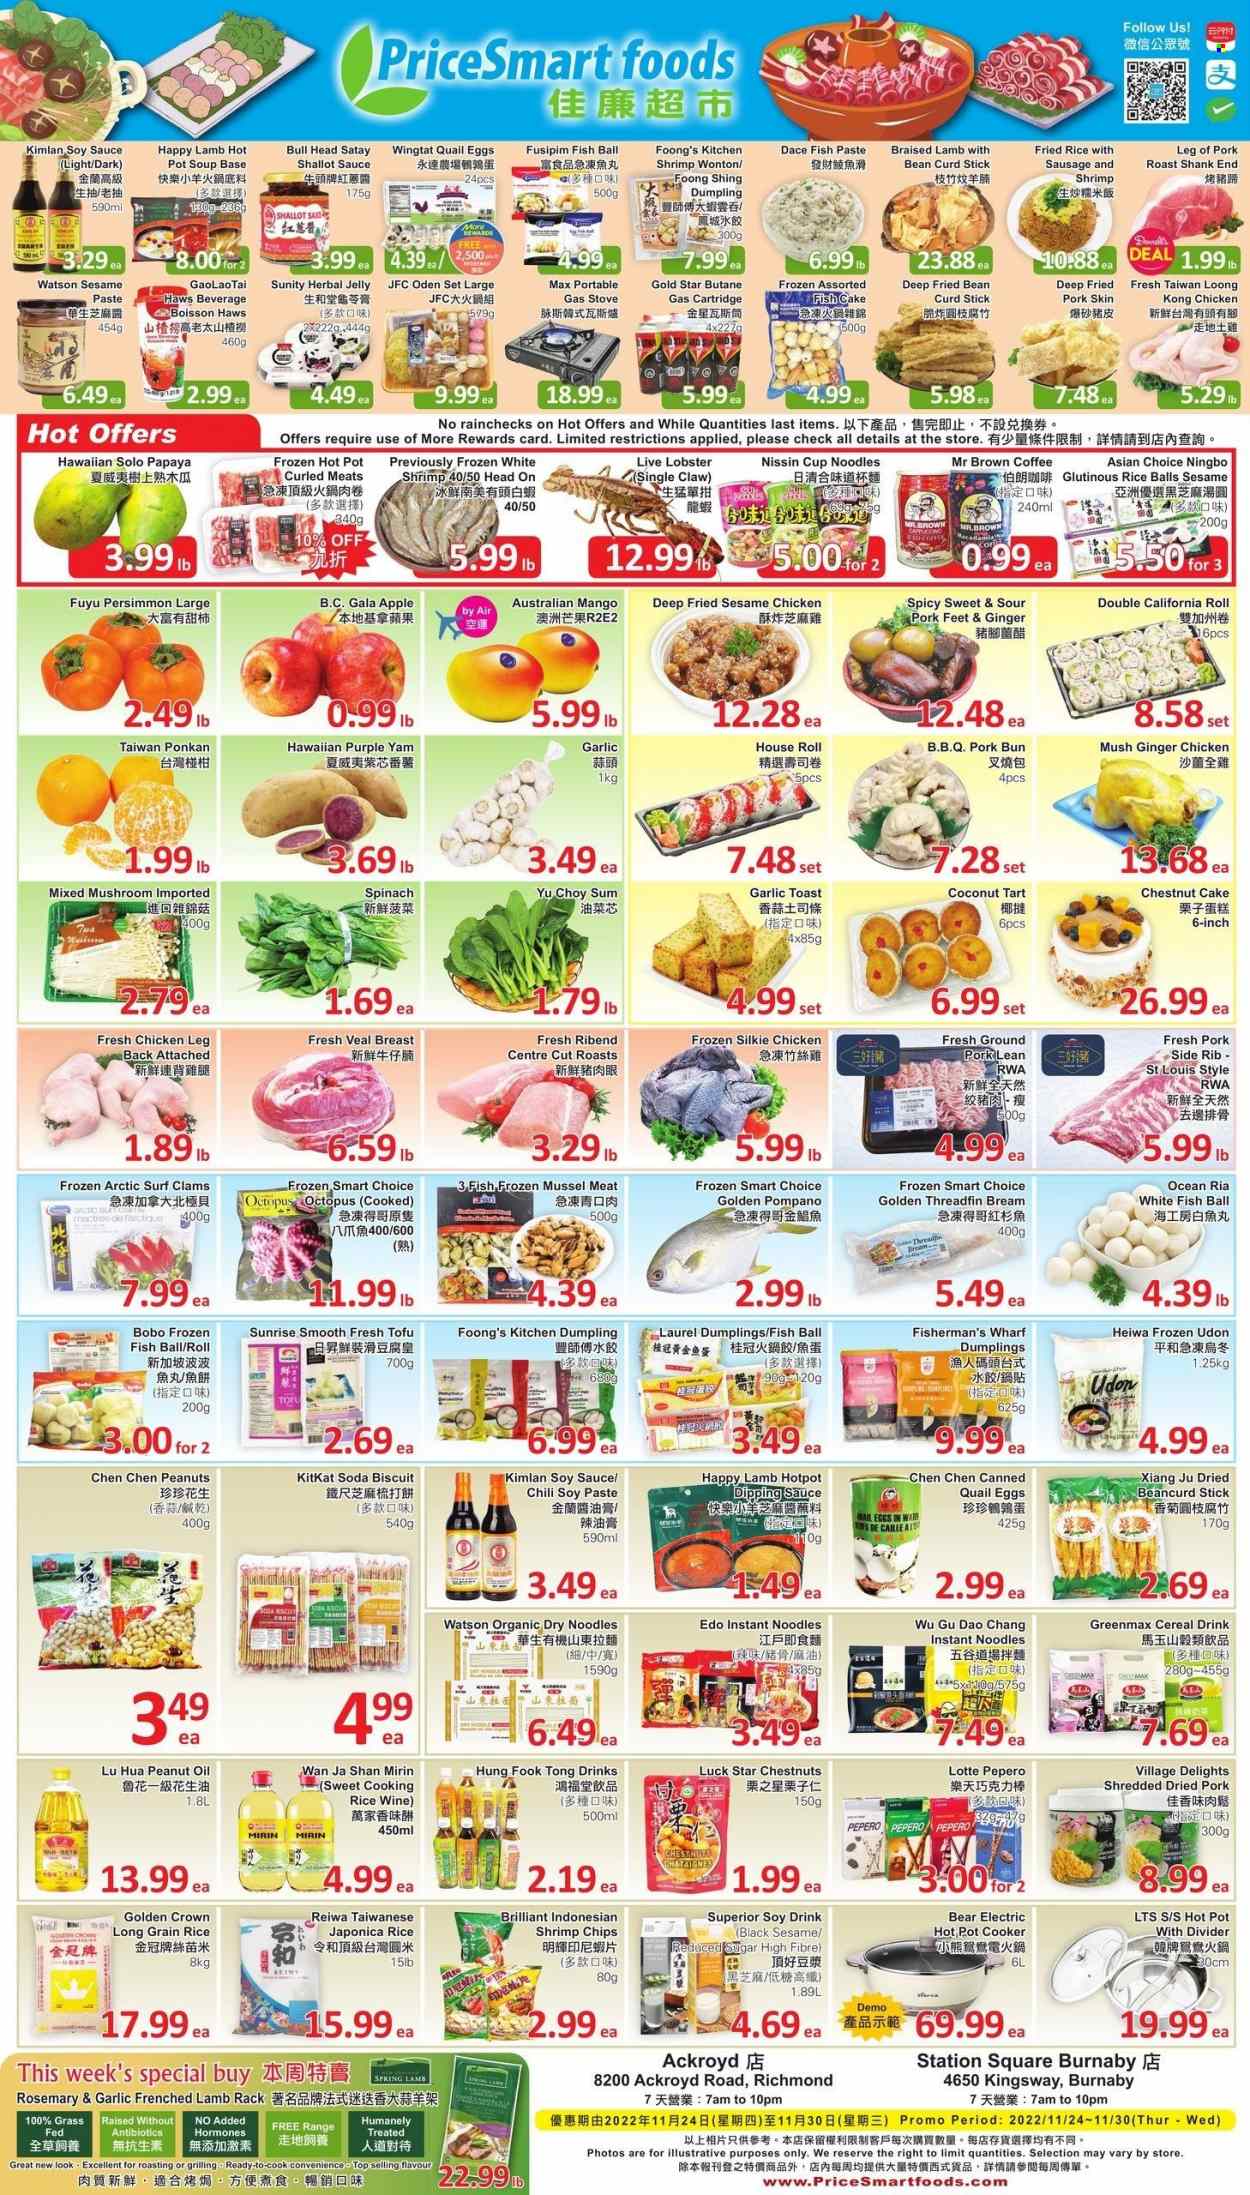 PriceSmart Foods Flyer - November 24, 2022 - November 30, 2022 - Sales products - mushroom, cake, Gala apple, papaya, persimmons, coconut, ponkan, clams, mussel, whitefish, octopus, pompano, shrimps, soup, instant noodles, sauce, dumpling, noodles cup, noodles, Nissin, sausage, curd, tofu, eggs, rice balls, fish cake, KitKat, jelly, biscuit, cereals, long grain rice, rosemary, soy sauce, mirin, peanut oil, oil, chestnuts, peanuts, soda, coffee, rice wine, quail, chicken legs, ground pork, pork meat, pork roast, Scott, Surf, pot, hot pot. Page 1.